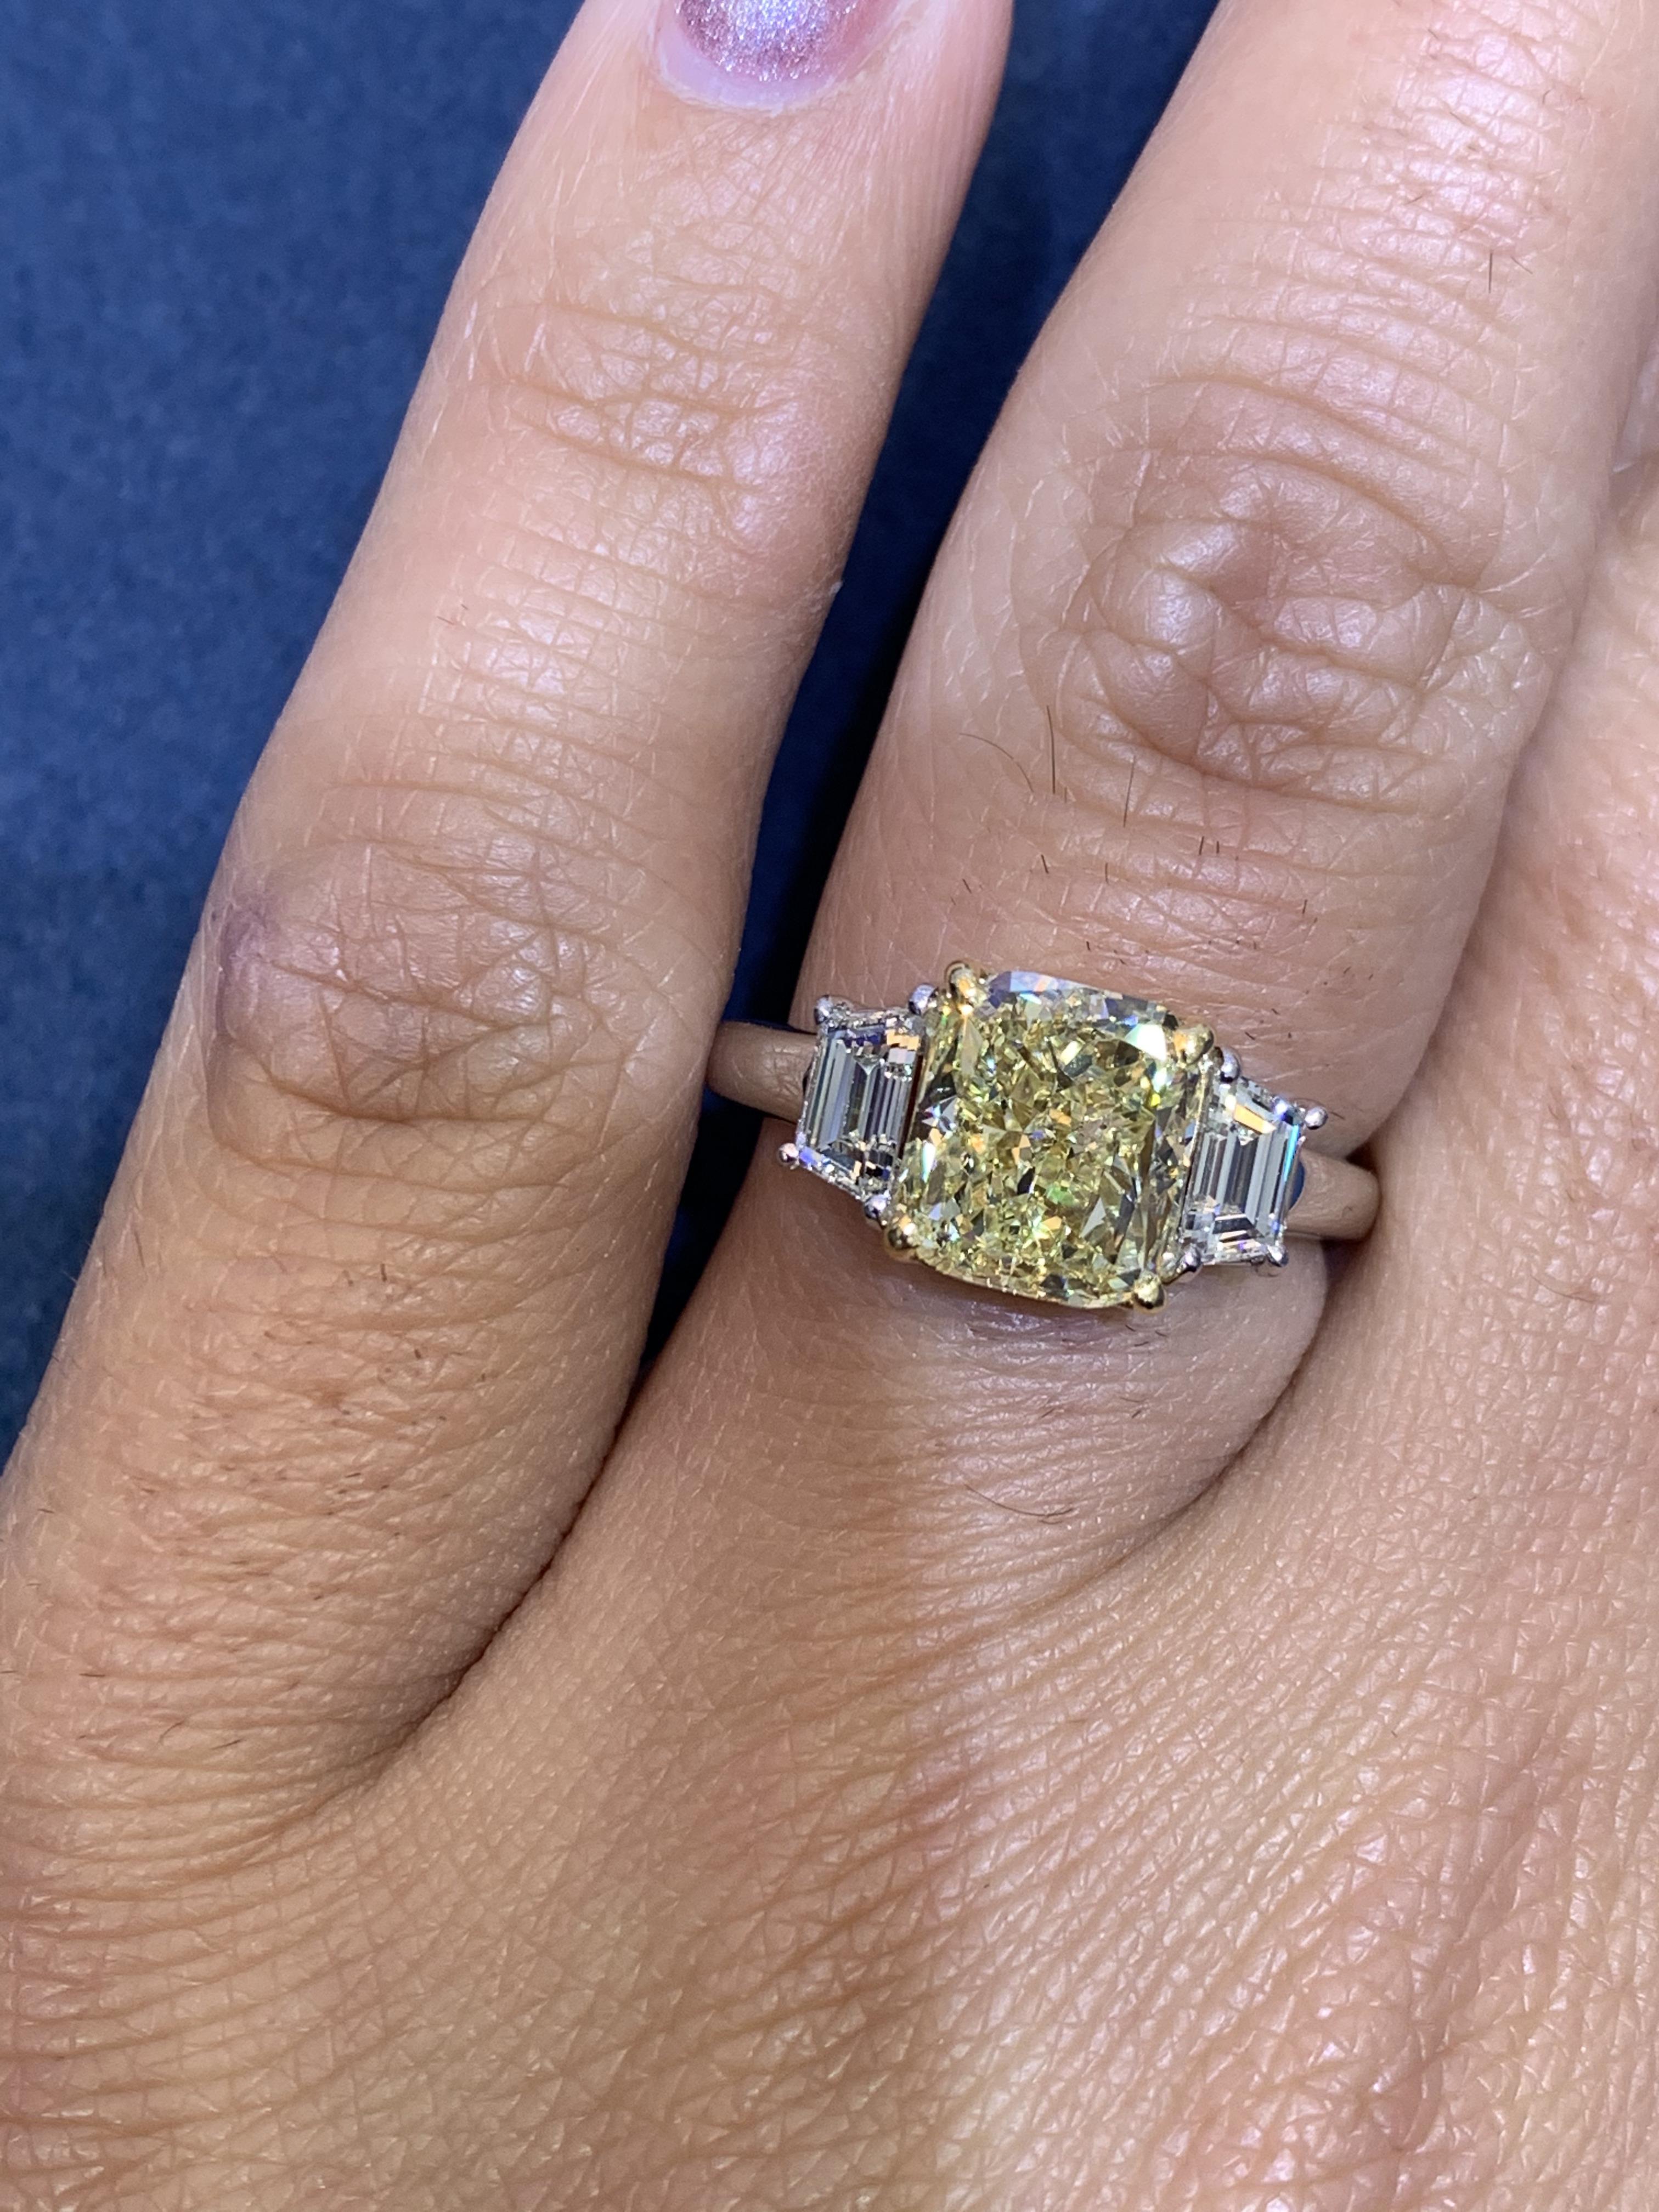 David Rosenberg 3.01 ct Cushion Fancy Light Yellow GIA Diamond Engagement Ring In New Condition For Sale In Boca Raton, FL